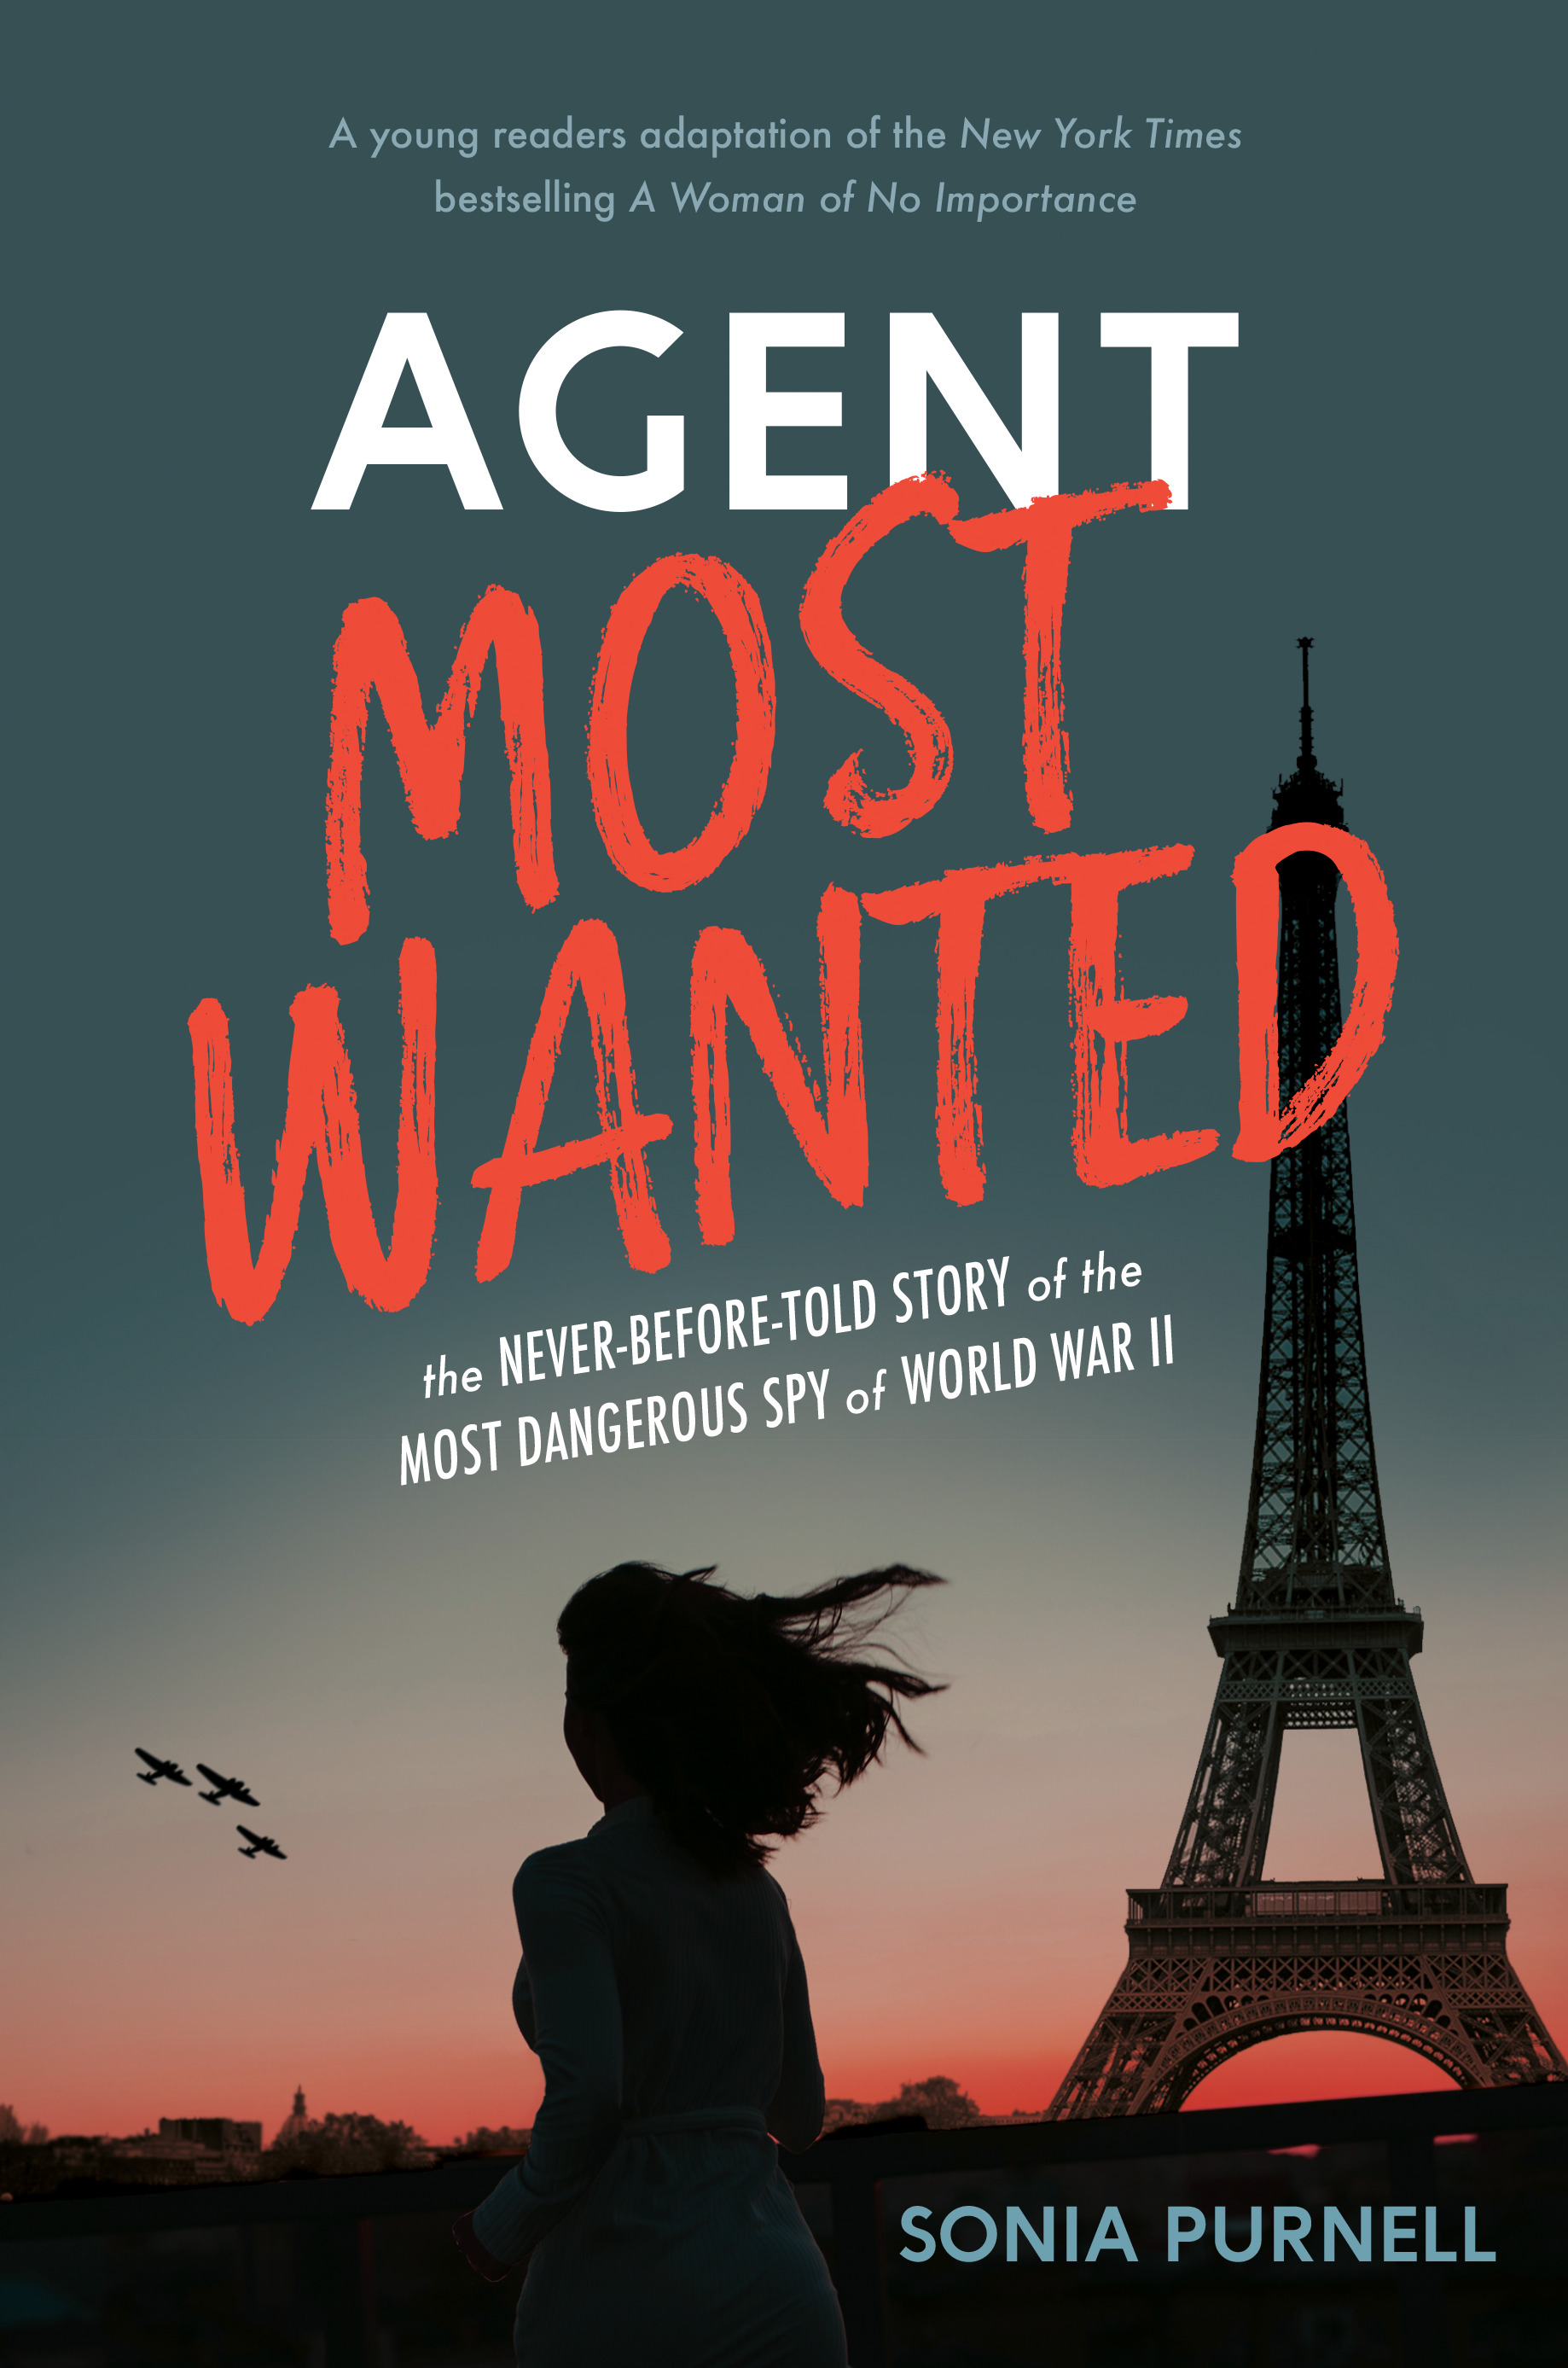 Agent Most Wanted : The Never-Before-Told Story of the Most Dangerous Spy of World War II | Biography & Memoir